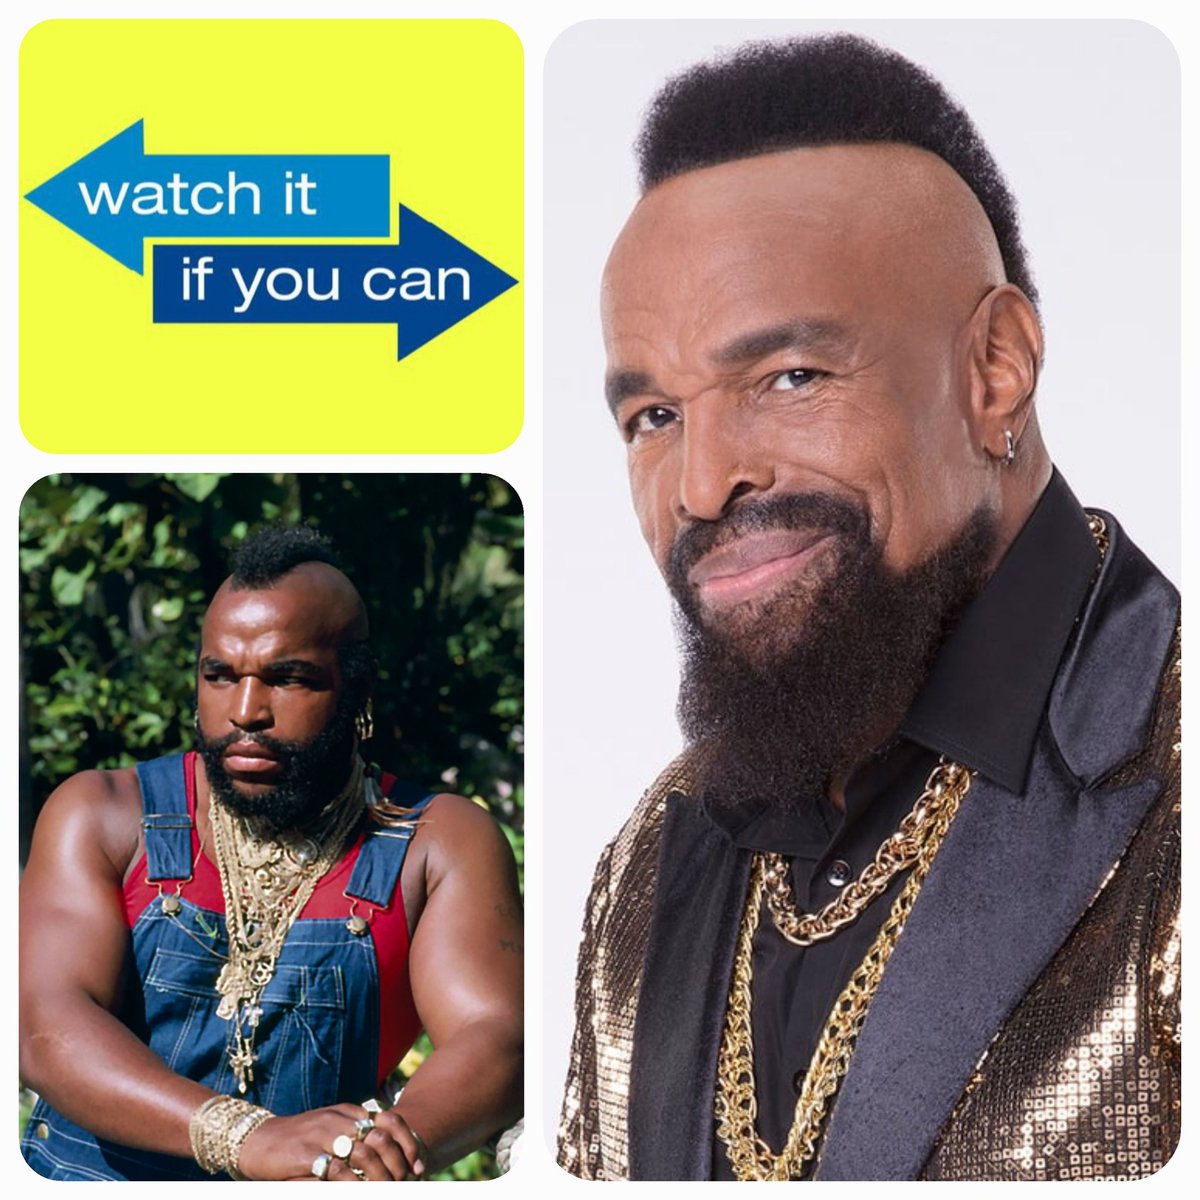 📢 'Shout Out'
 
Happy Birthday, Mr T! 🎁

#MrT #birthday #Ateam  #pitythefool #clubberlang #babaracus #rocky3